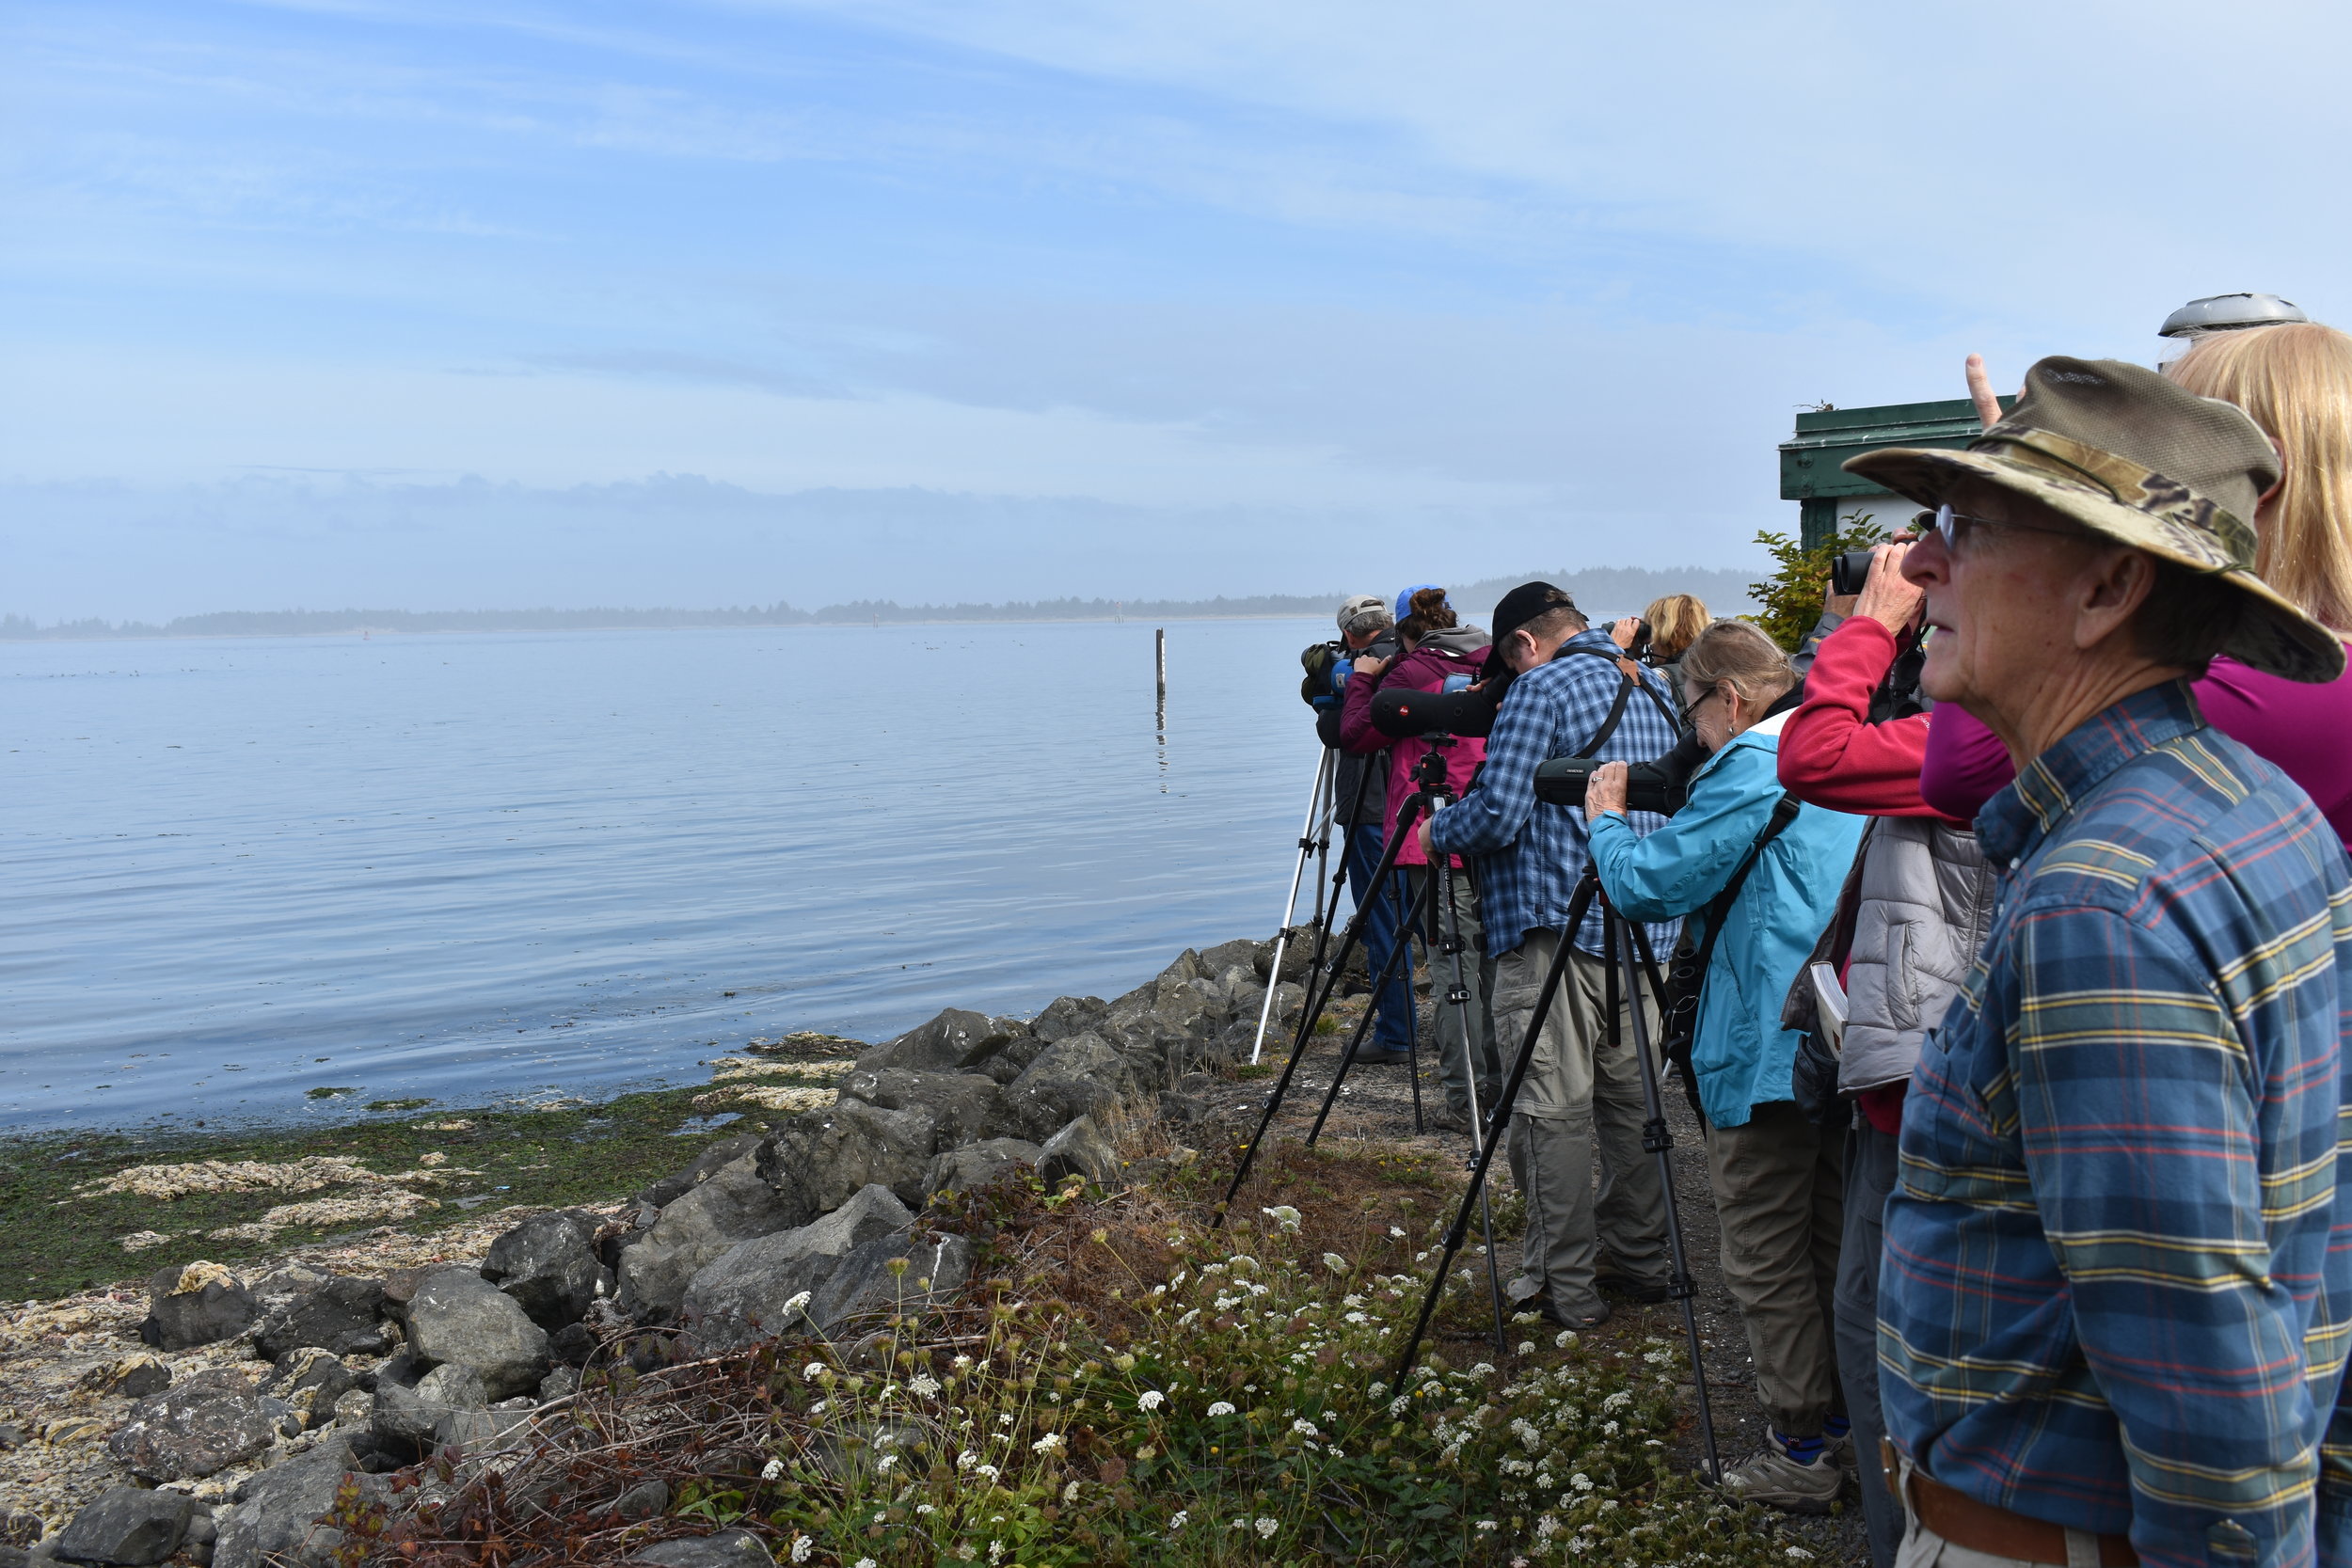  Birding at the South Jetty. Photo by Taylor Brooks 